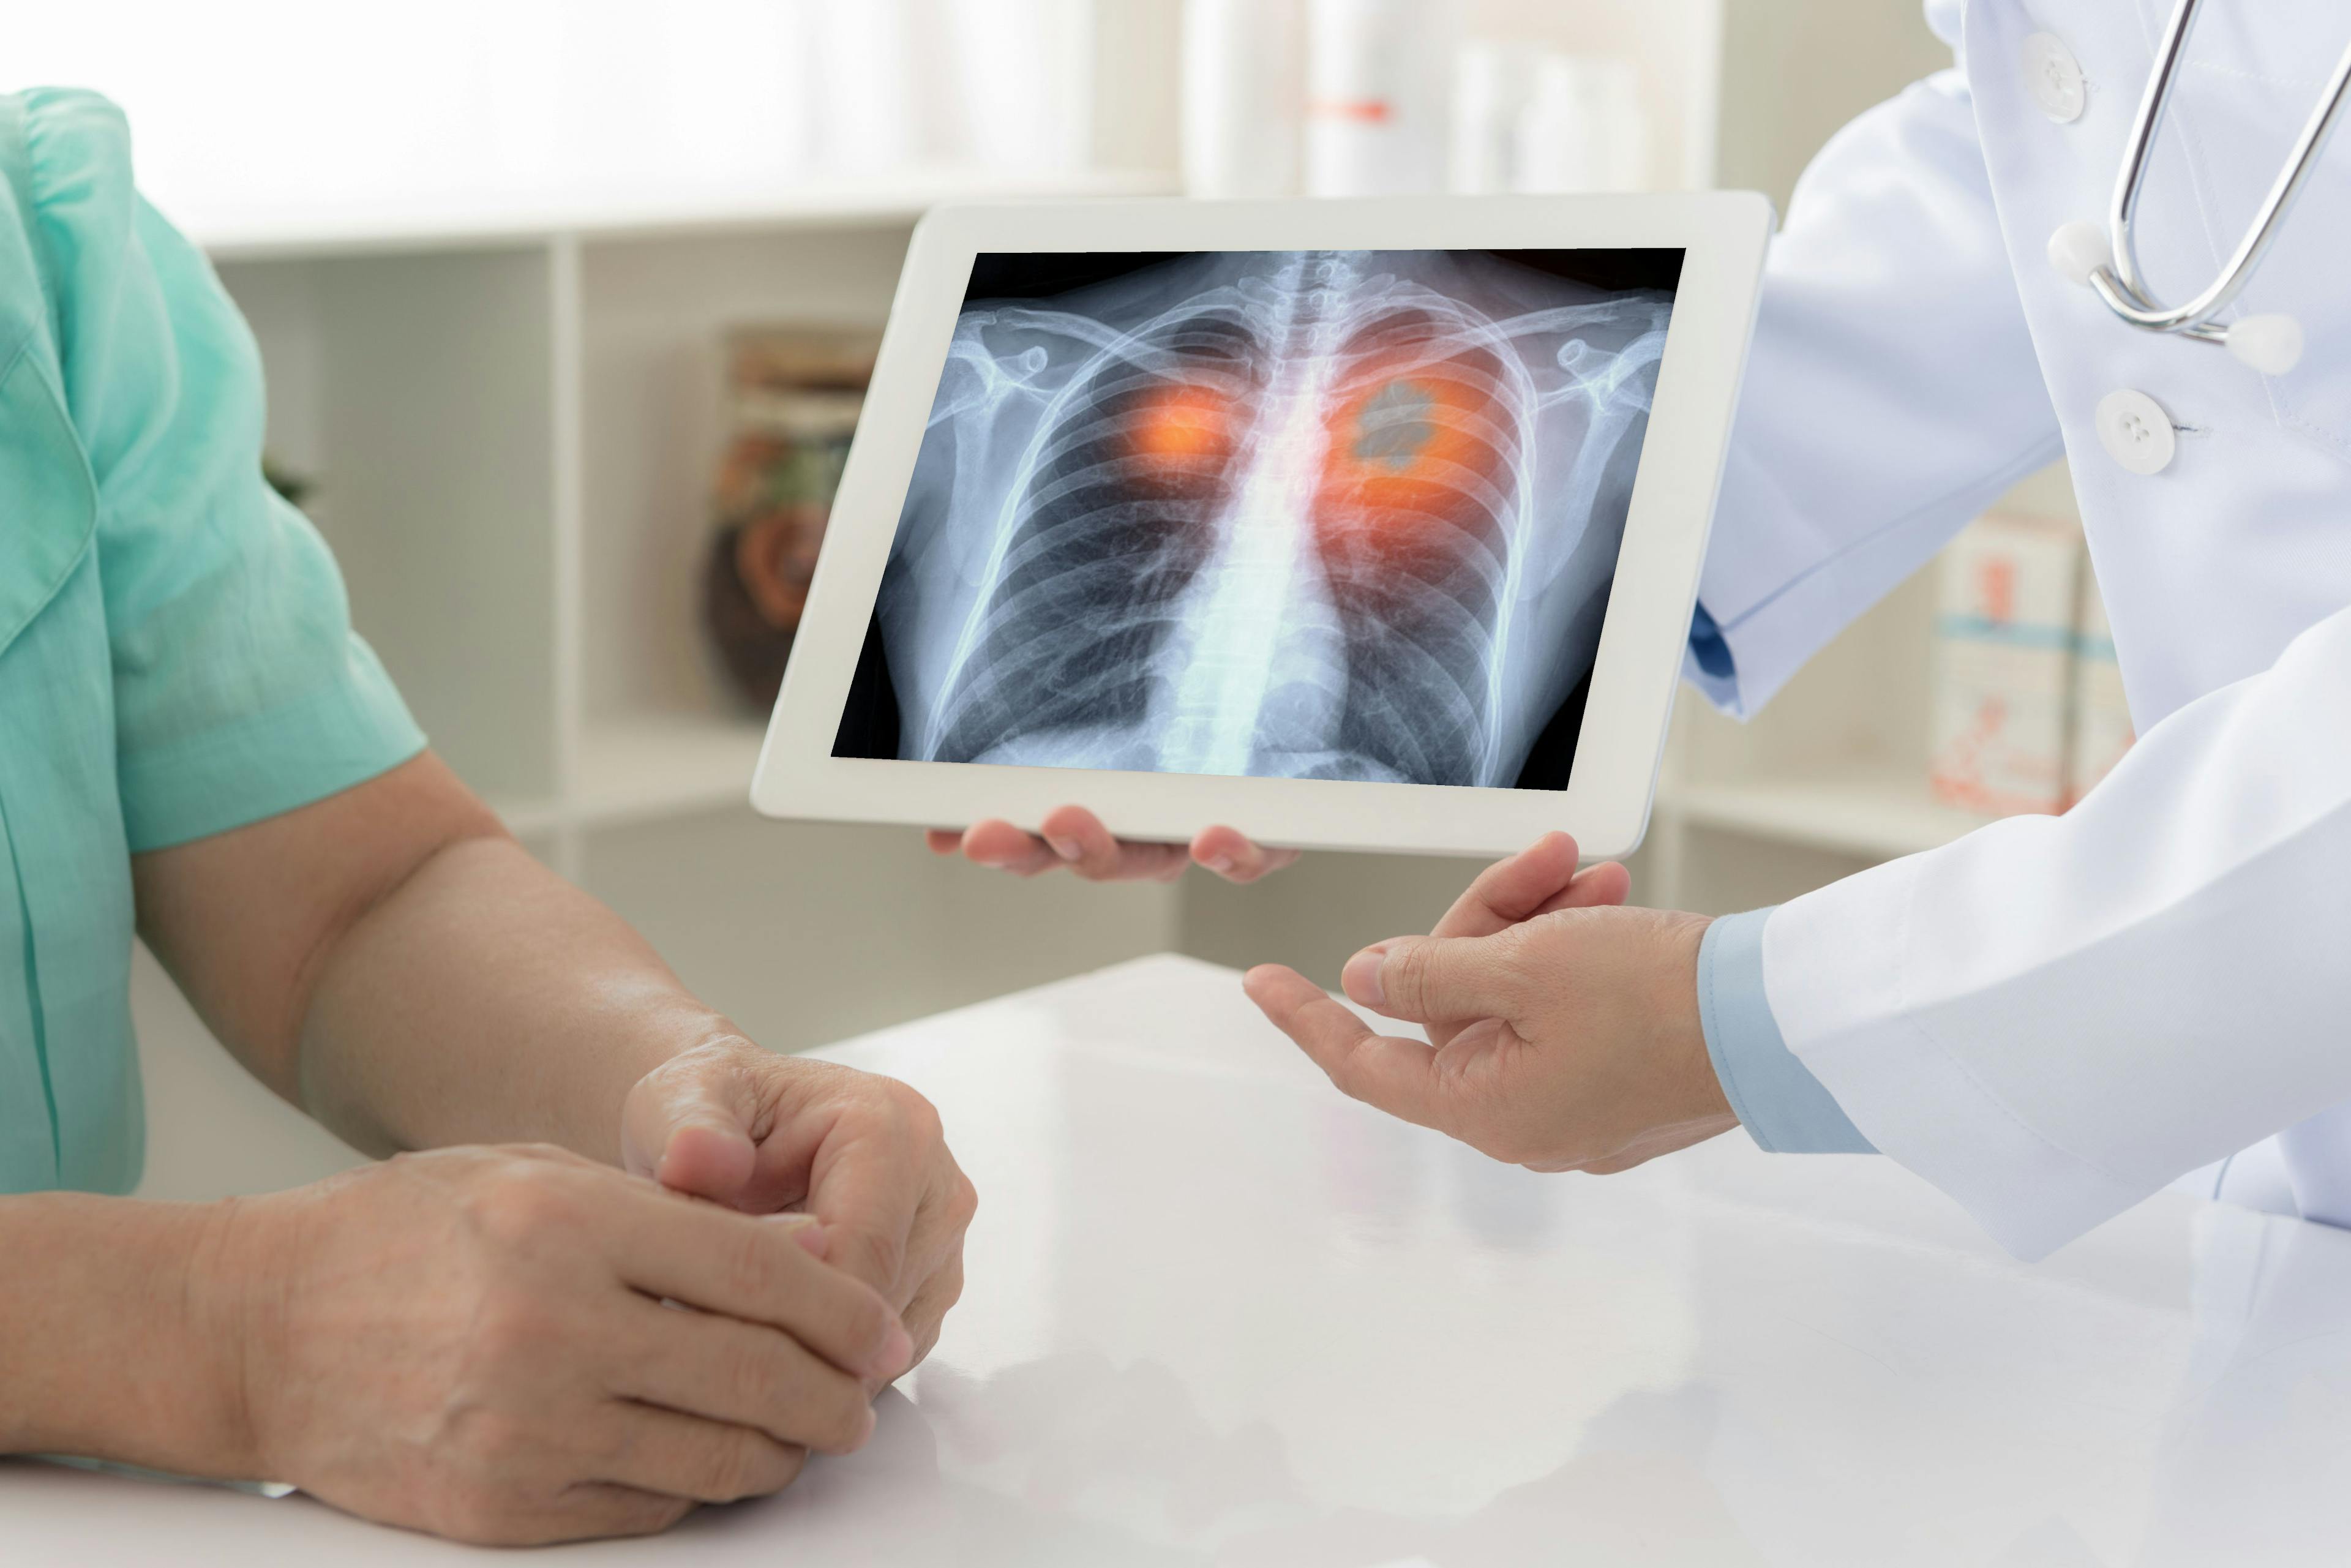 doctor showing patient lung cancer image | Image credit: ©utah51  stock.adobe.com